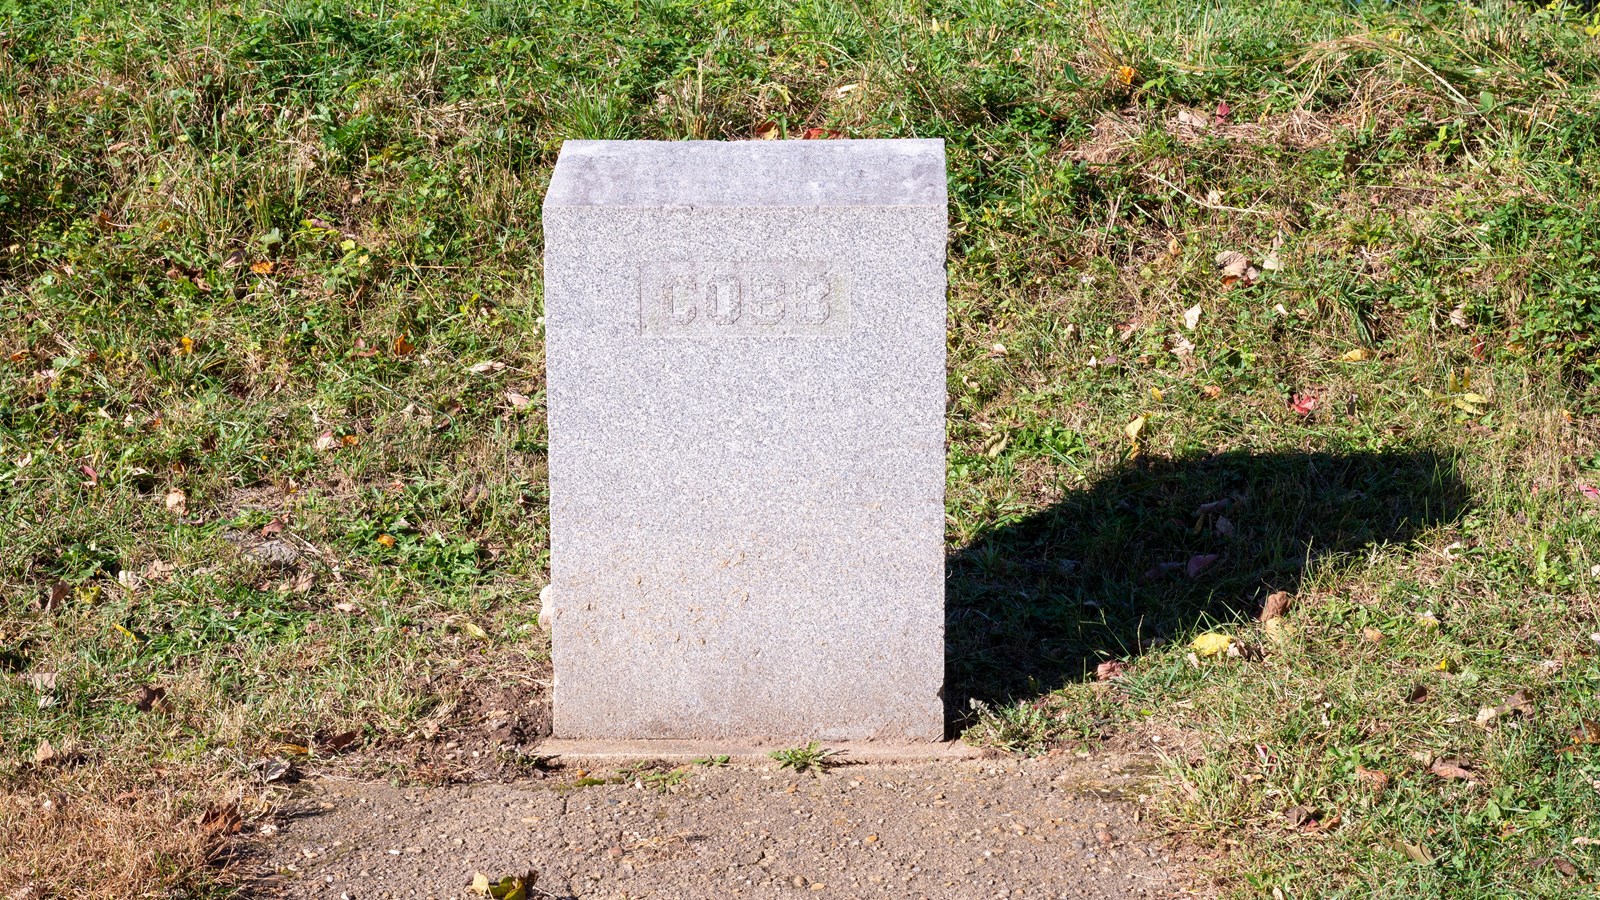 A rectangular stone memorial, 2 feet high, with the name Cobb inscribed on the stone.